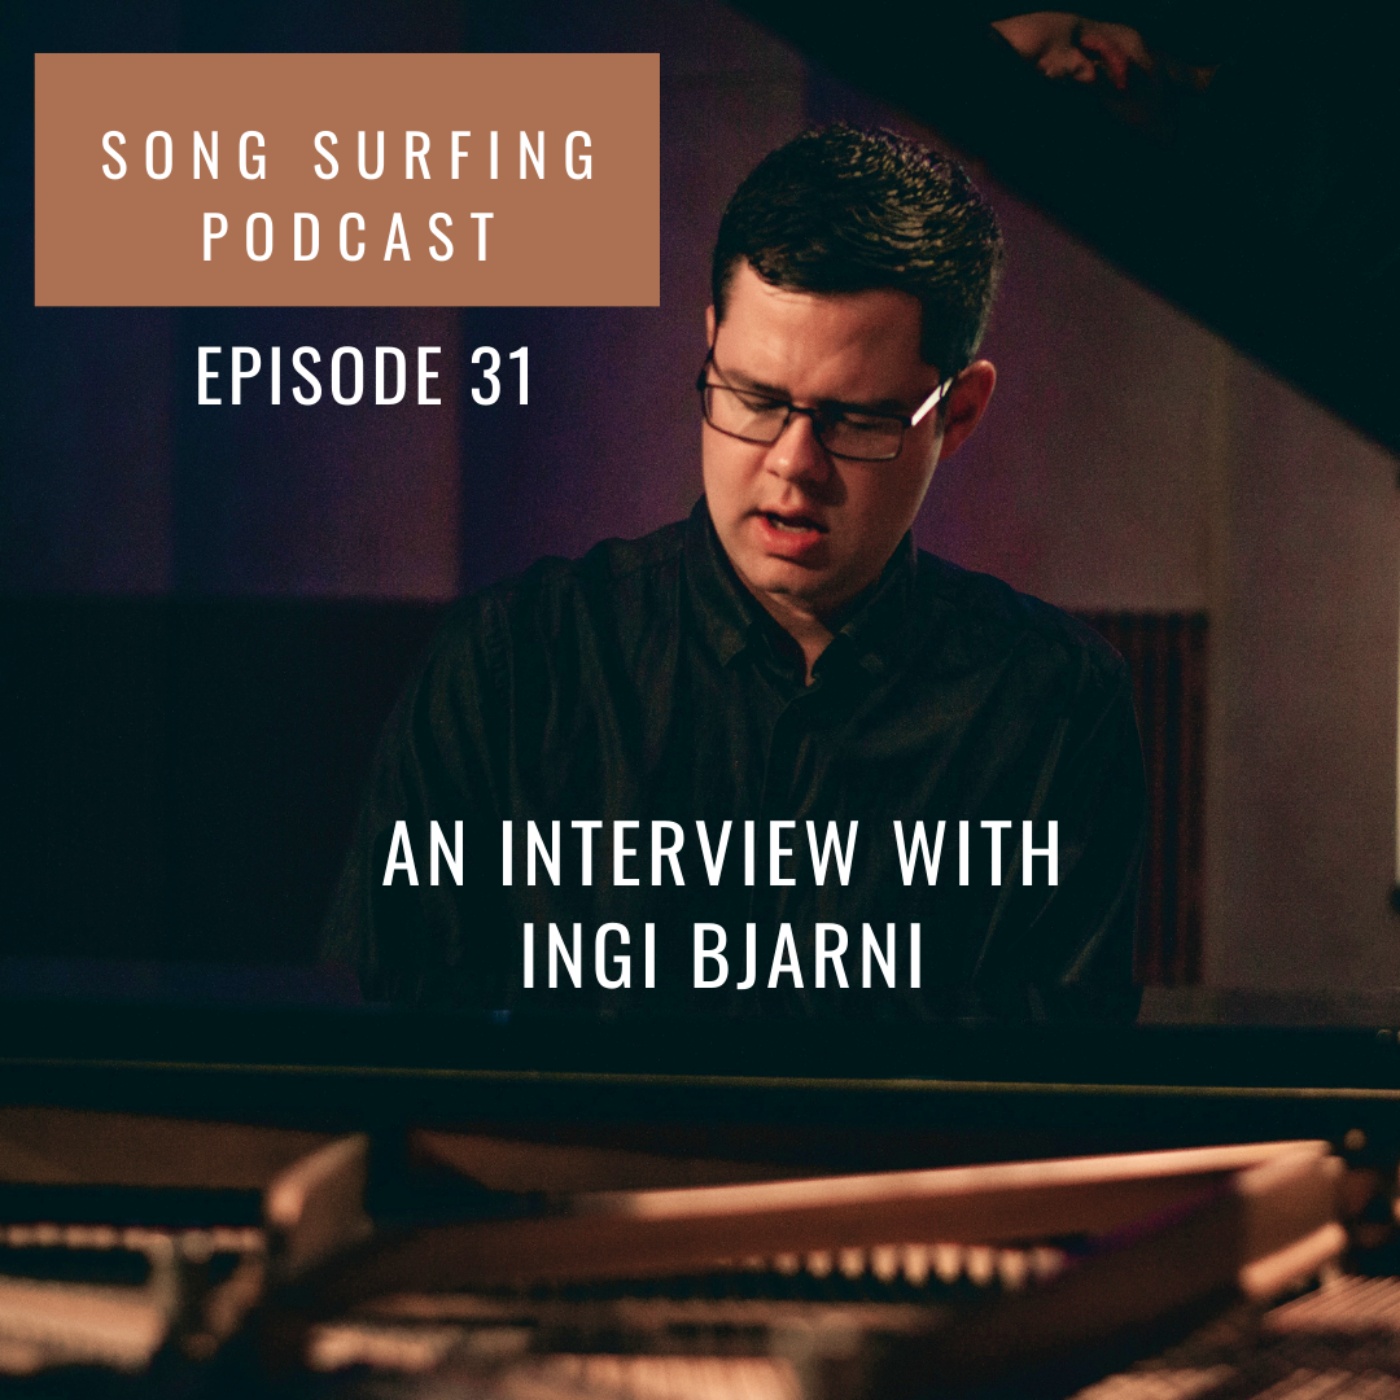 Artwork for podcast Song Surfing